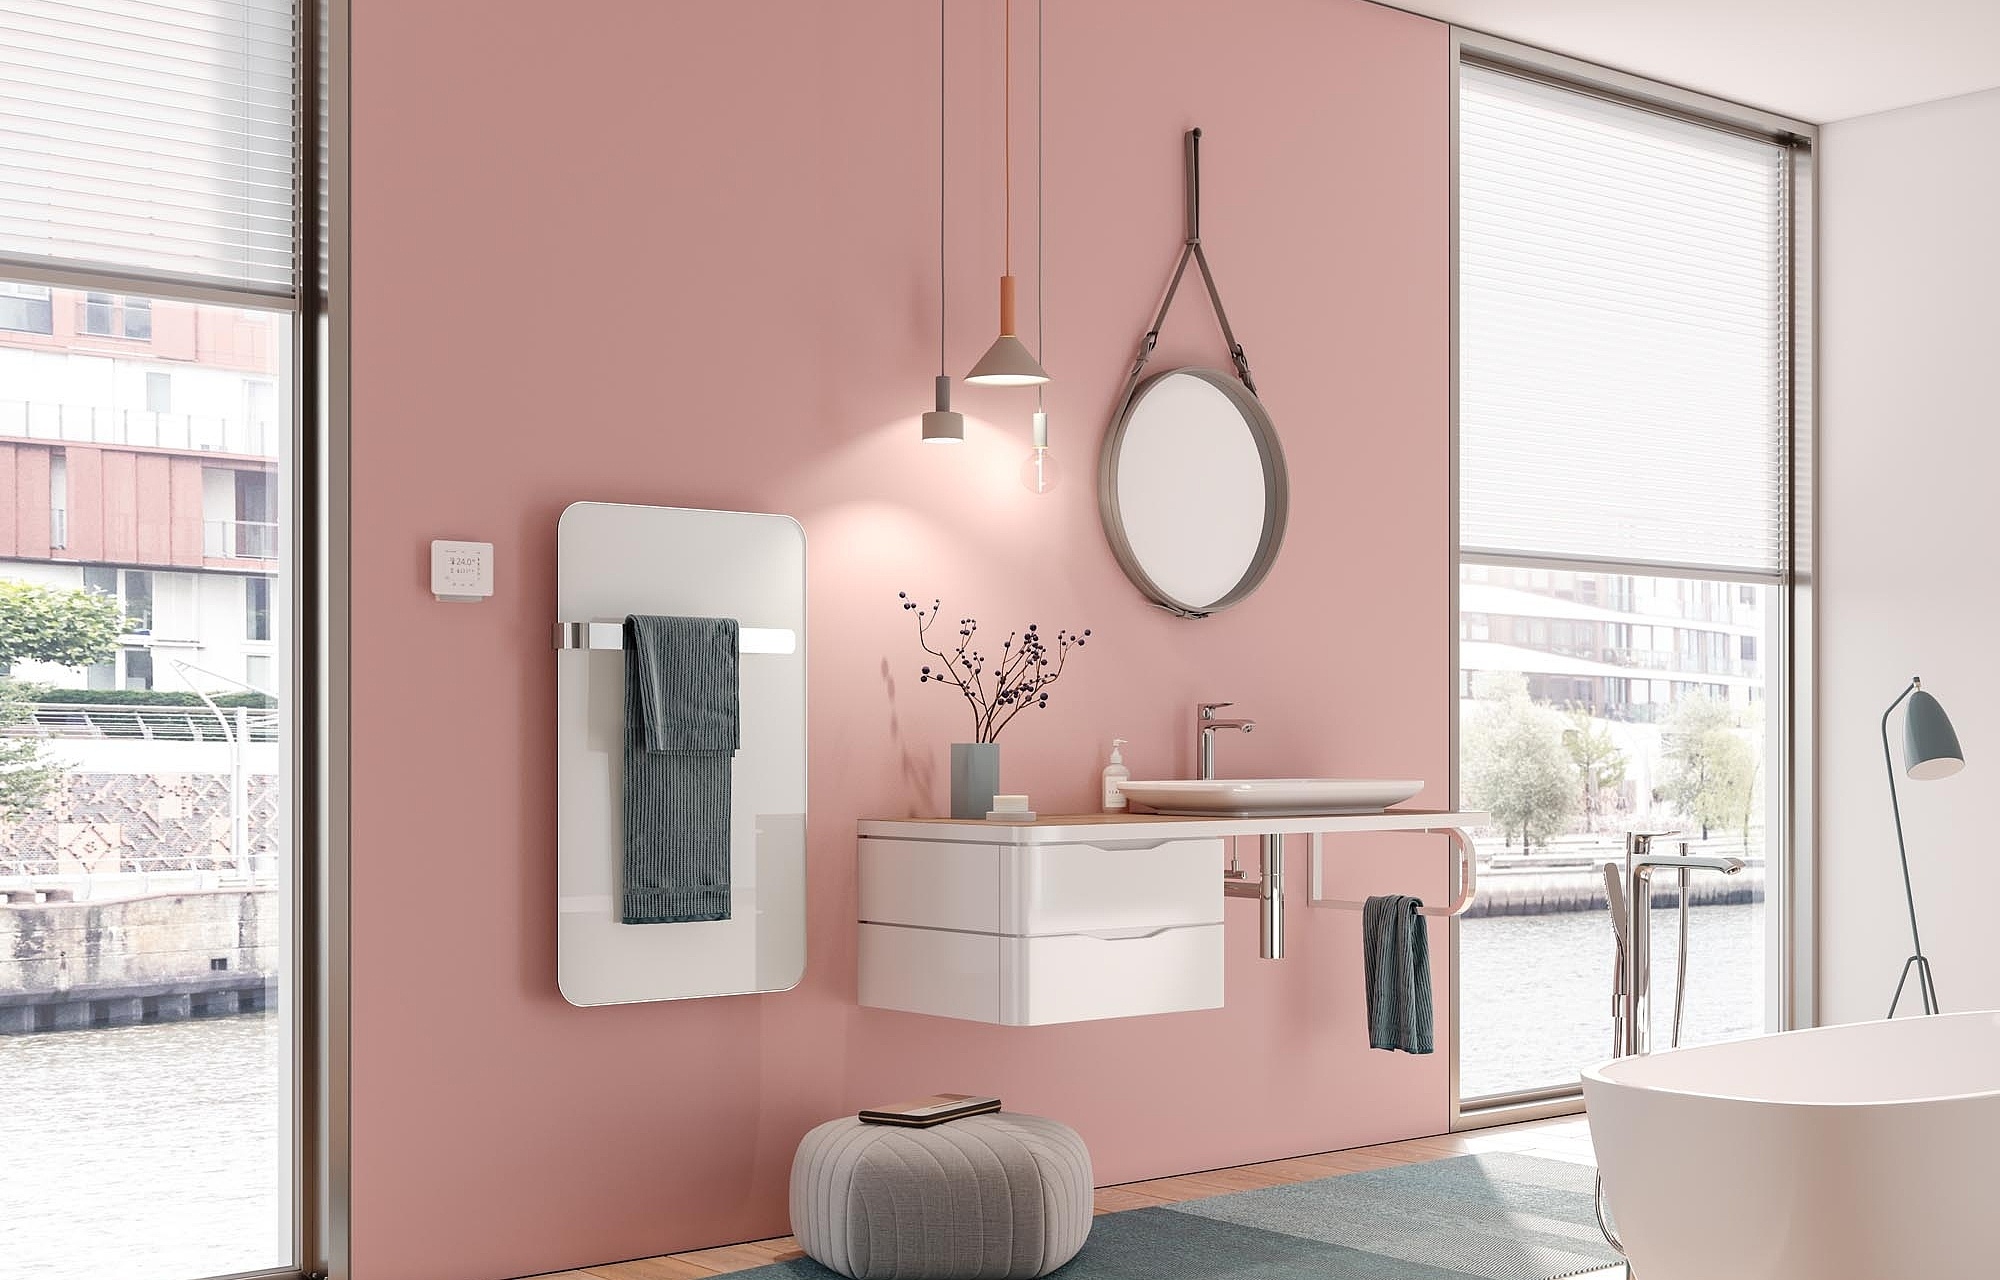 Kermi Elveo design and bathroom radiators – ideal for buildings without a central heating system.